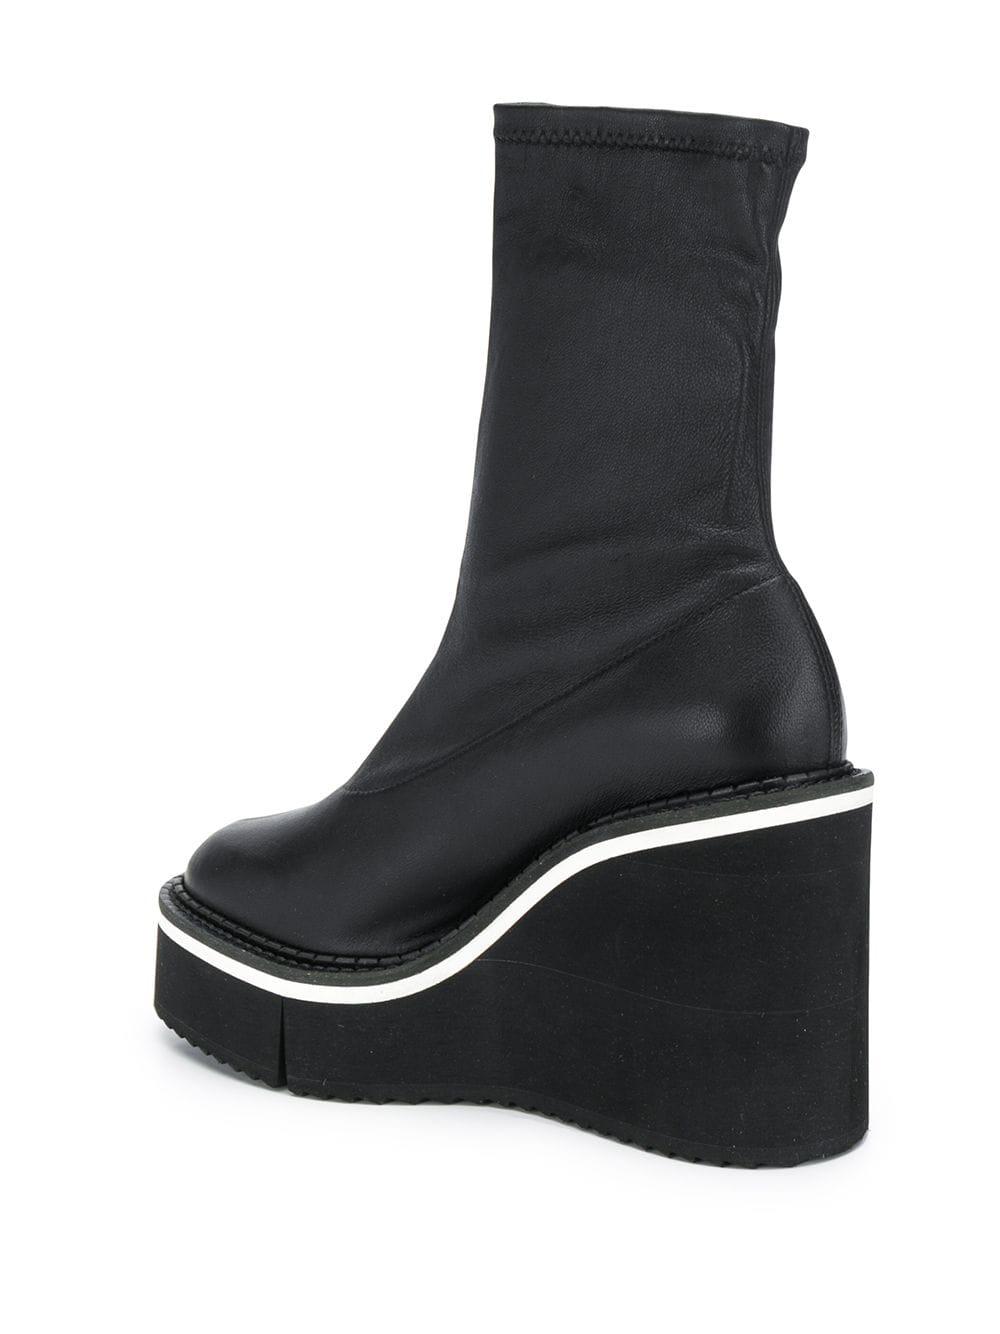 Robert Clergerie Leather Bliss Boots in Black | Lyst